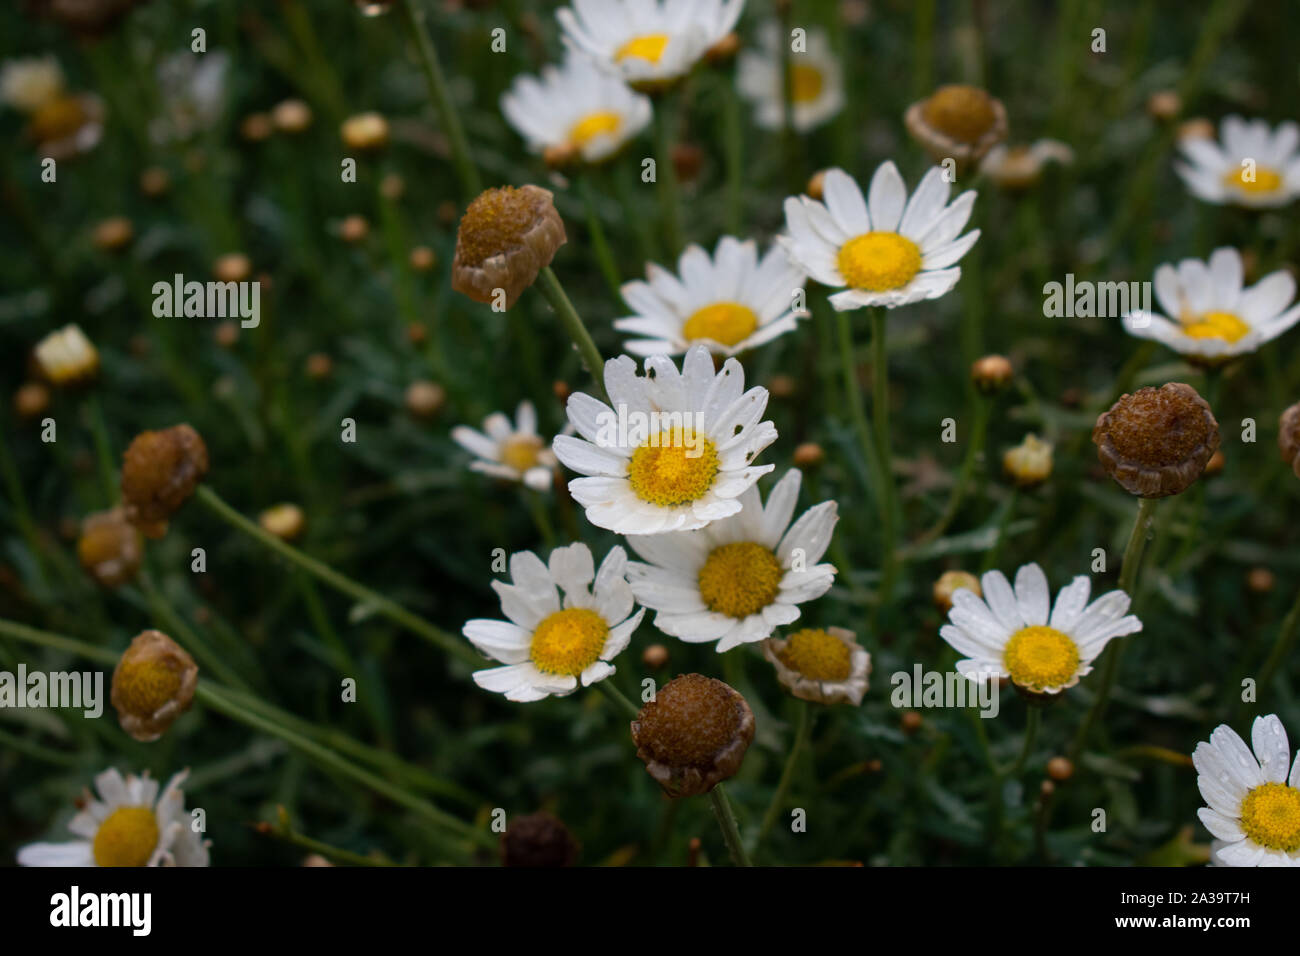 Multiple daisy flowers with rain drops against green grass. Stock Photo